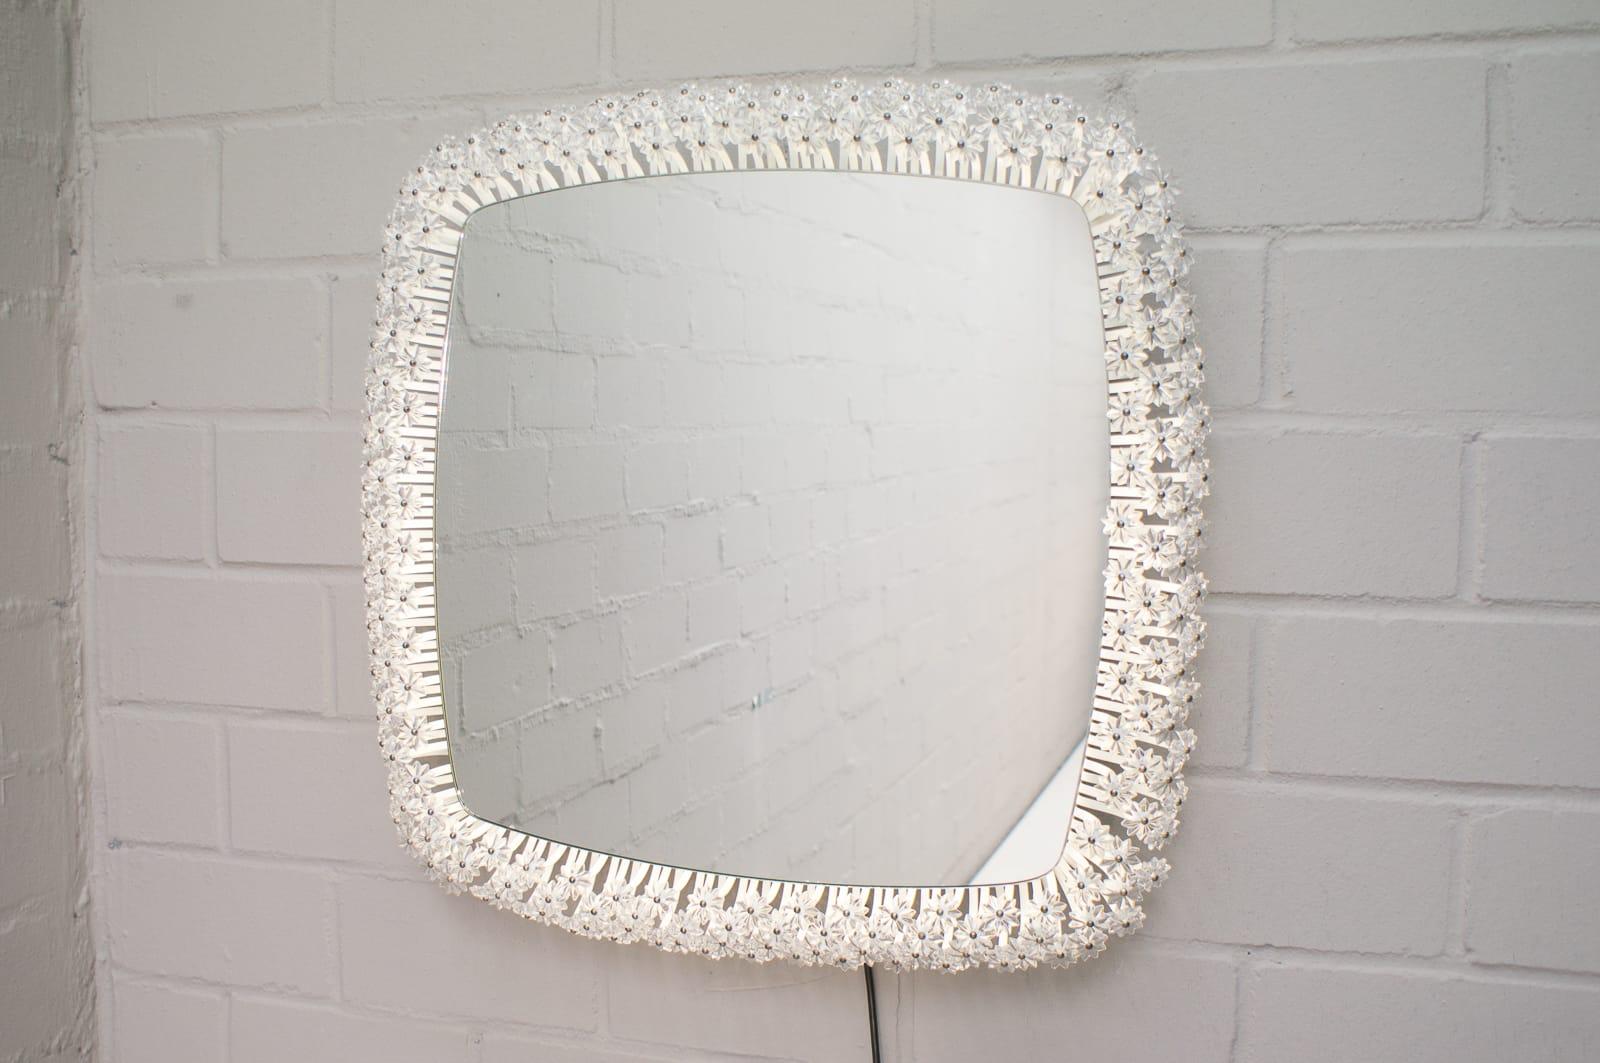 Modernist wall mirror with illuminated background. 
Surrounded by crystal glass blossoms. 
Designed in the 1950s and produced in the 1960s.
Design by Emil Stejnar for Rupert Nikoll Austria, 1950s.
Original mirror in metal frame with three rows